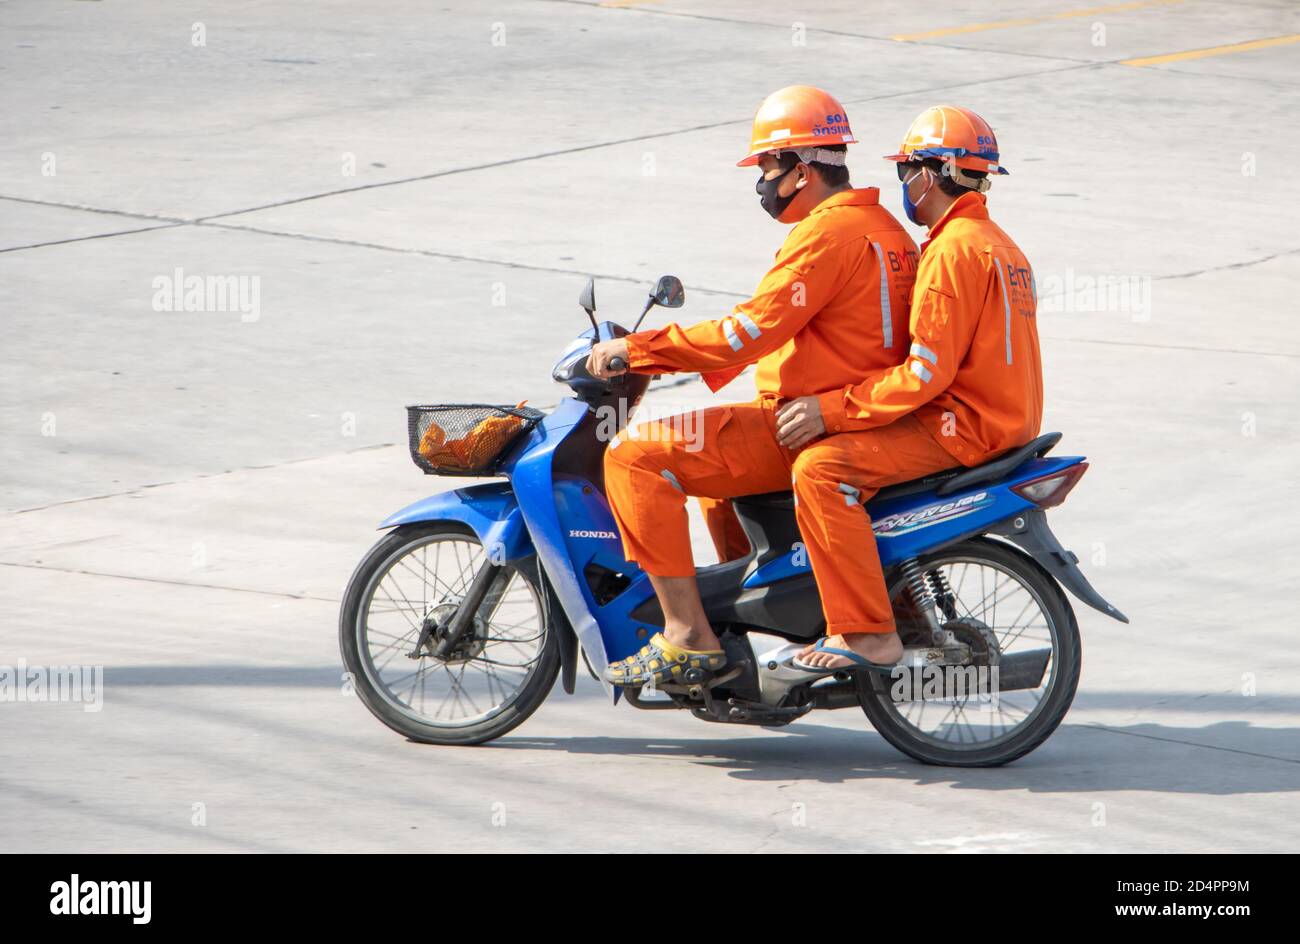 SAMUT PRAKAN, THAILAND, JUL 29 2020, Two men in the orange coveralls ride a motorcycle. Stock Photo